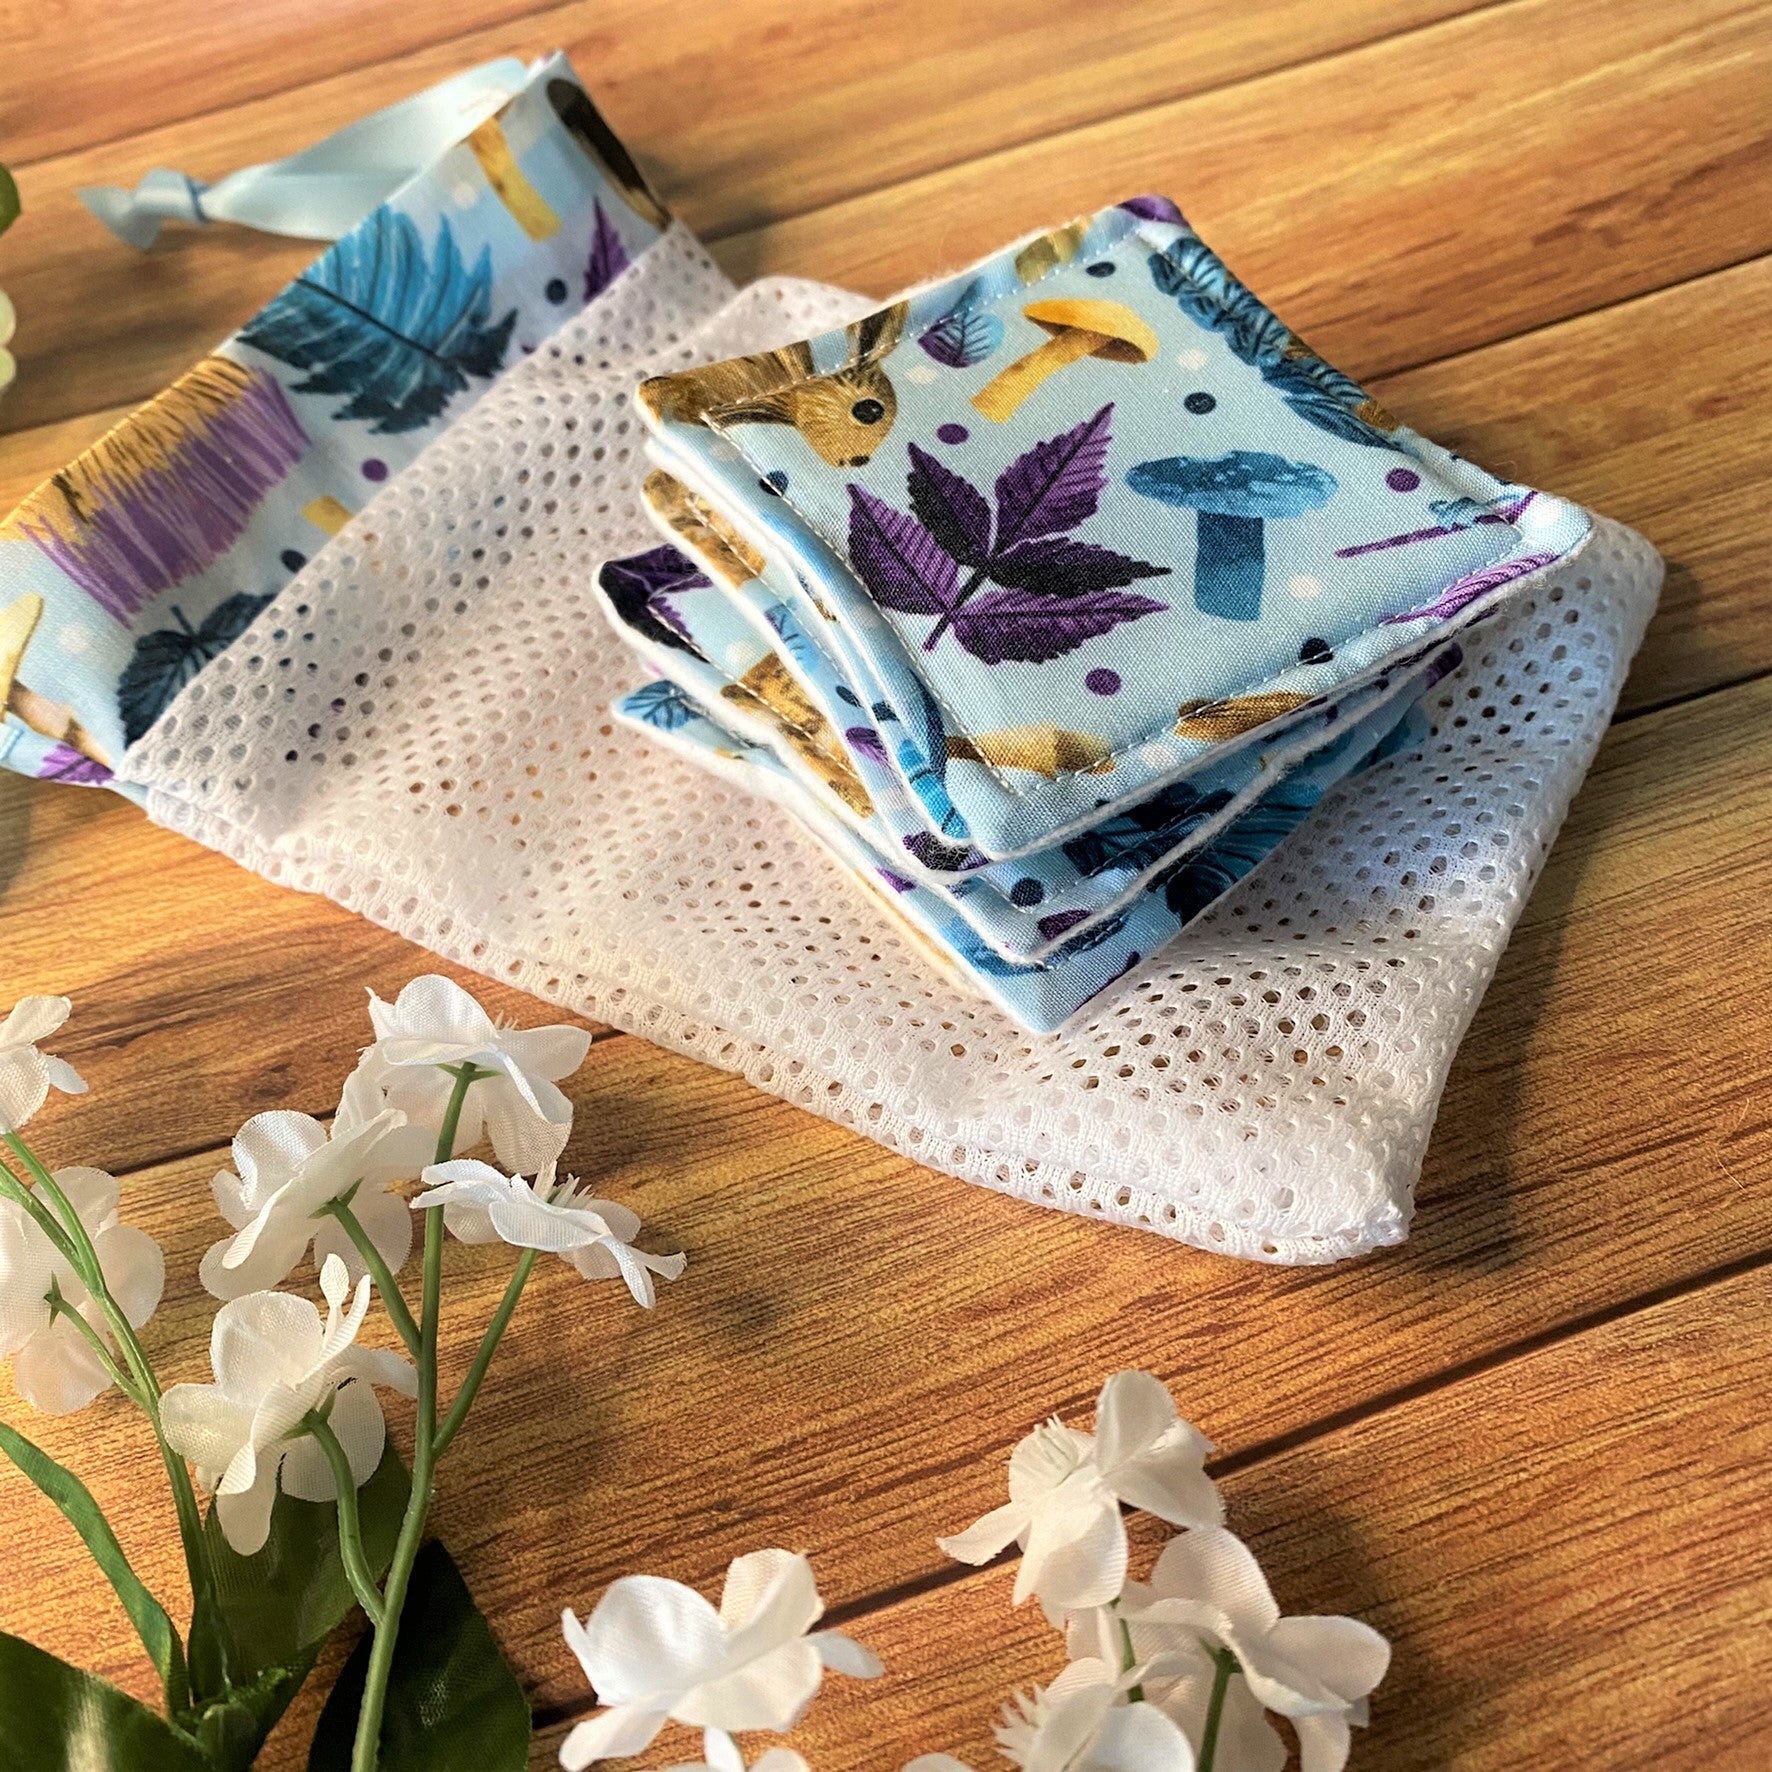 hare patterned reusable makeup removal pads and a washbag matching, on a wooden surface